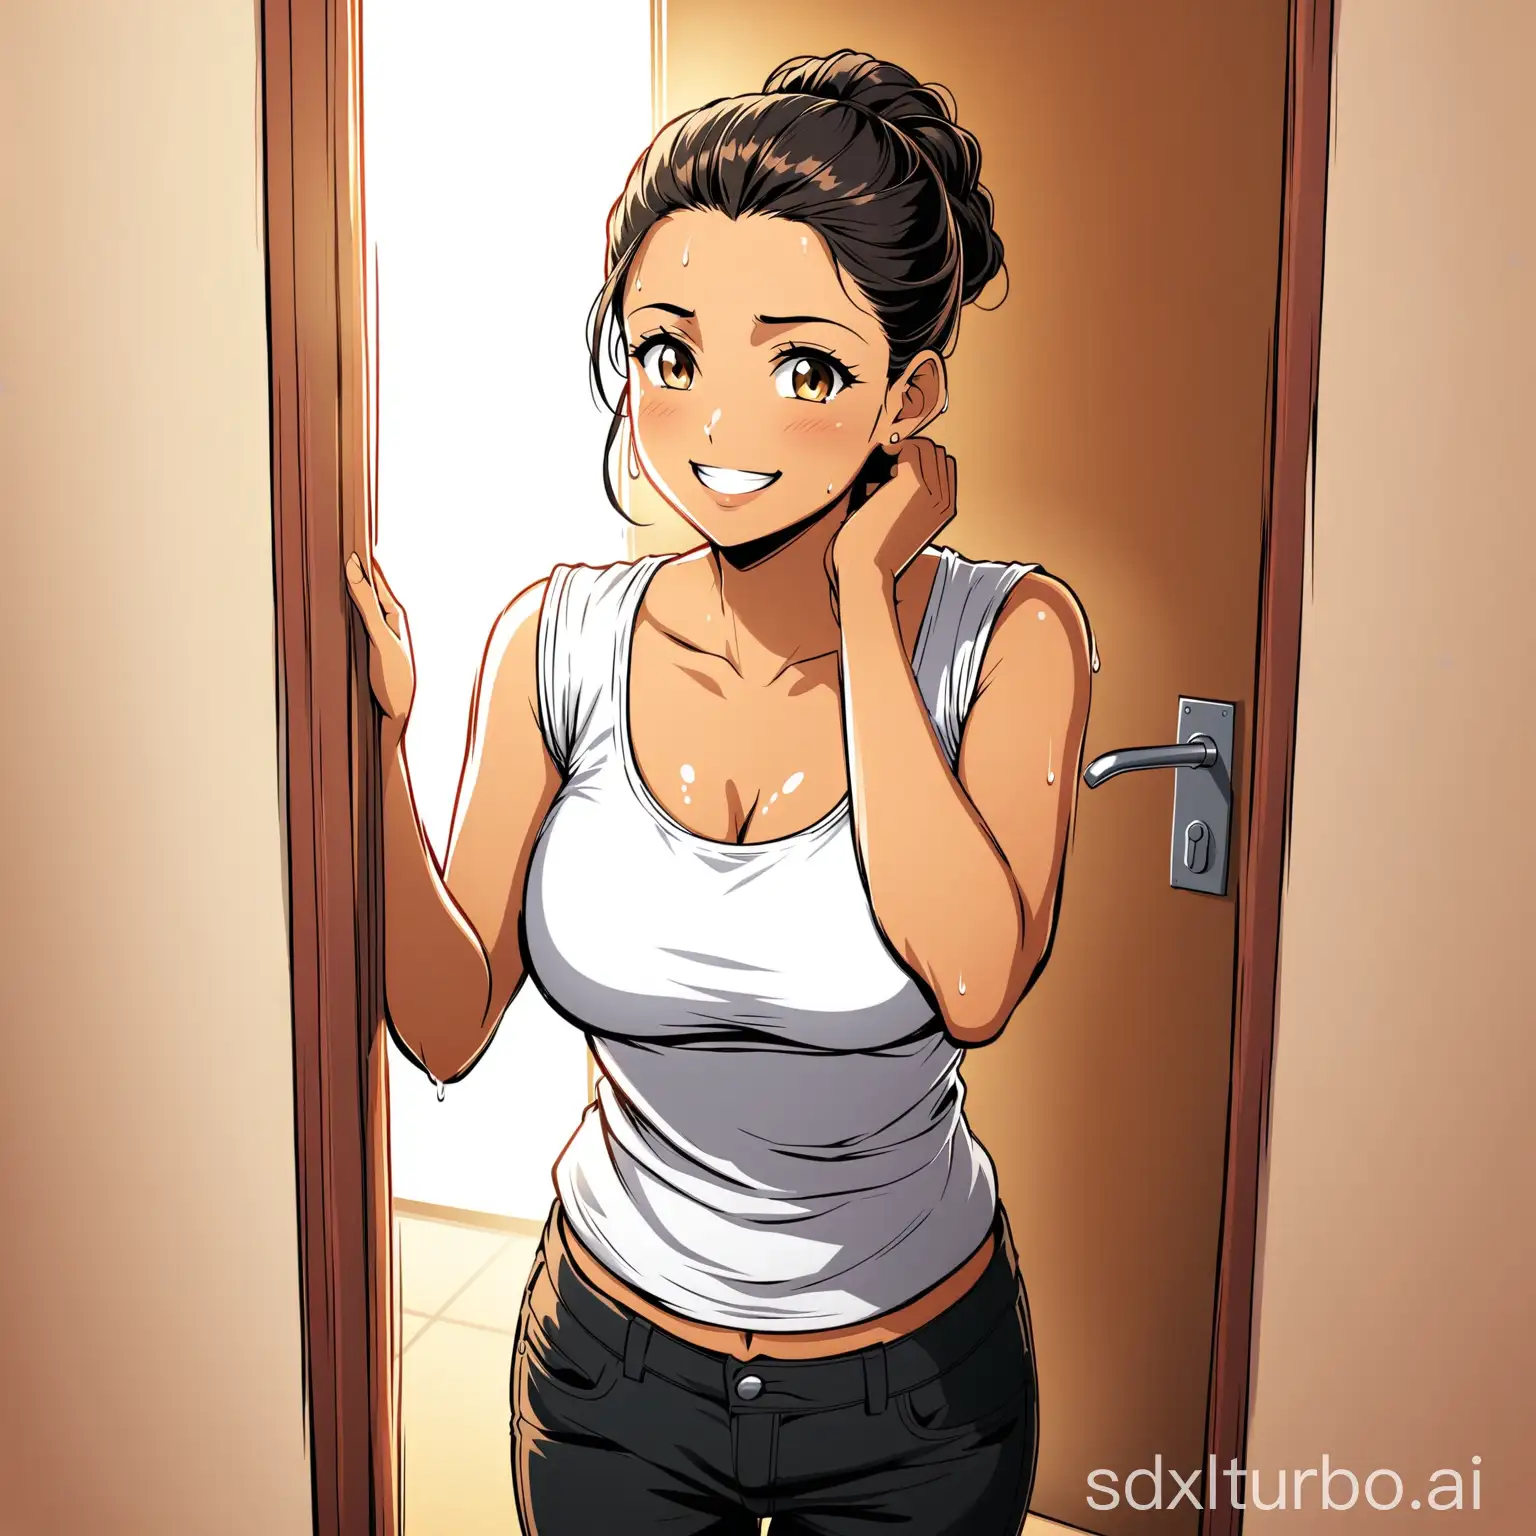 Light Skinned Waifu Short Indian Housewife, Brunette with Messy tied back hair, Wearing black jeans and a white top clinging to her medium bosom, Smiling with sweat over her face, Late 30s, Standing in her house doorway, Nervous Expression with a smile